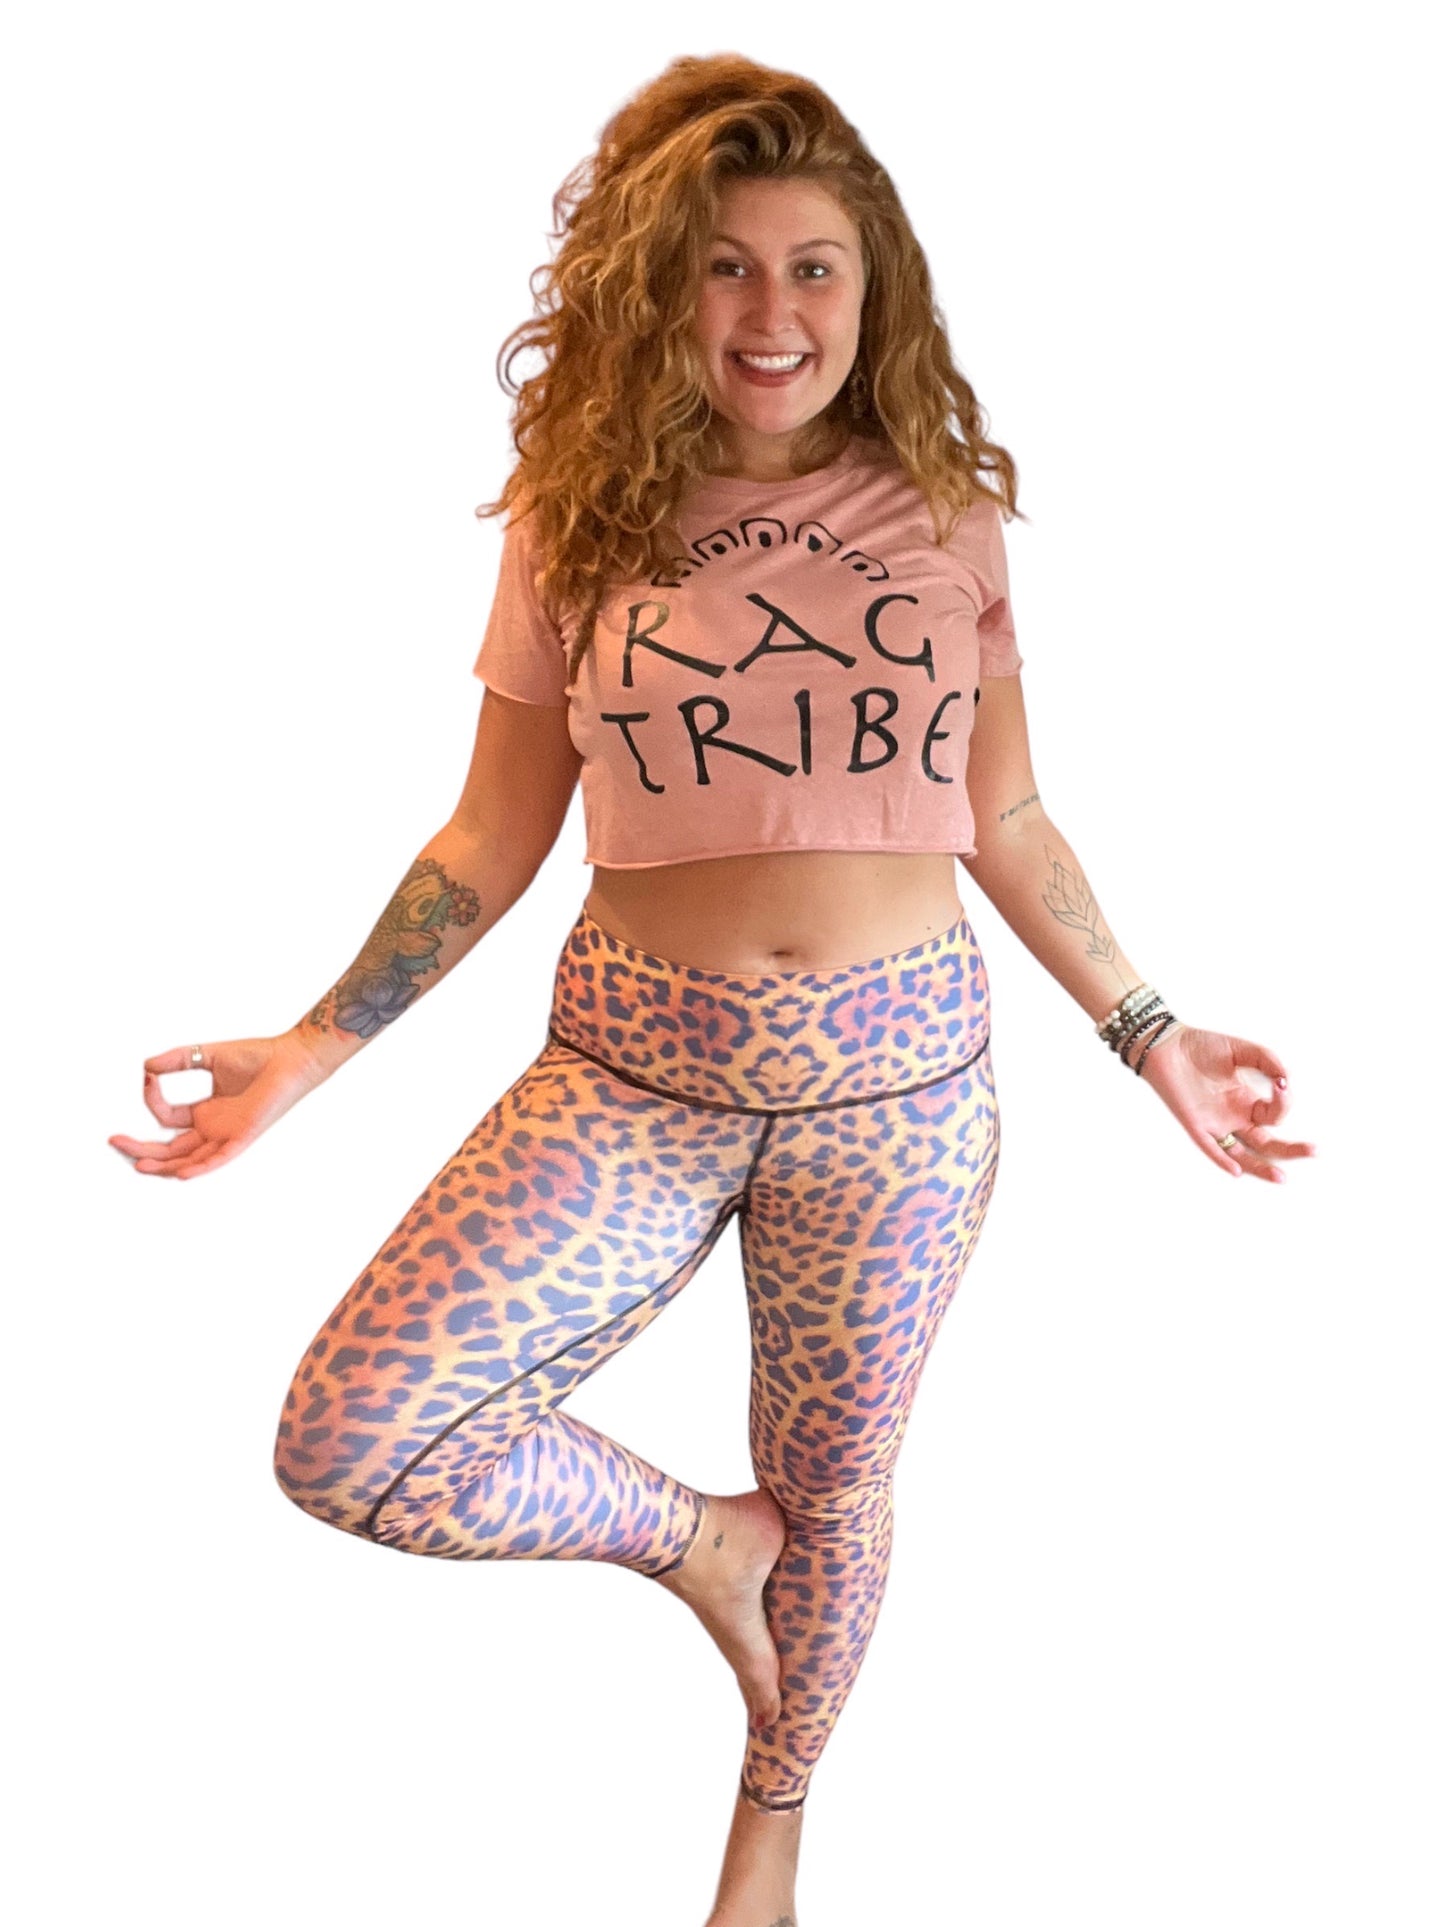 The Ragtribe Crop - Ragtribe Ethical Clothing & Productions, LLC